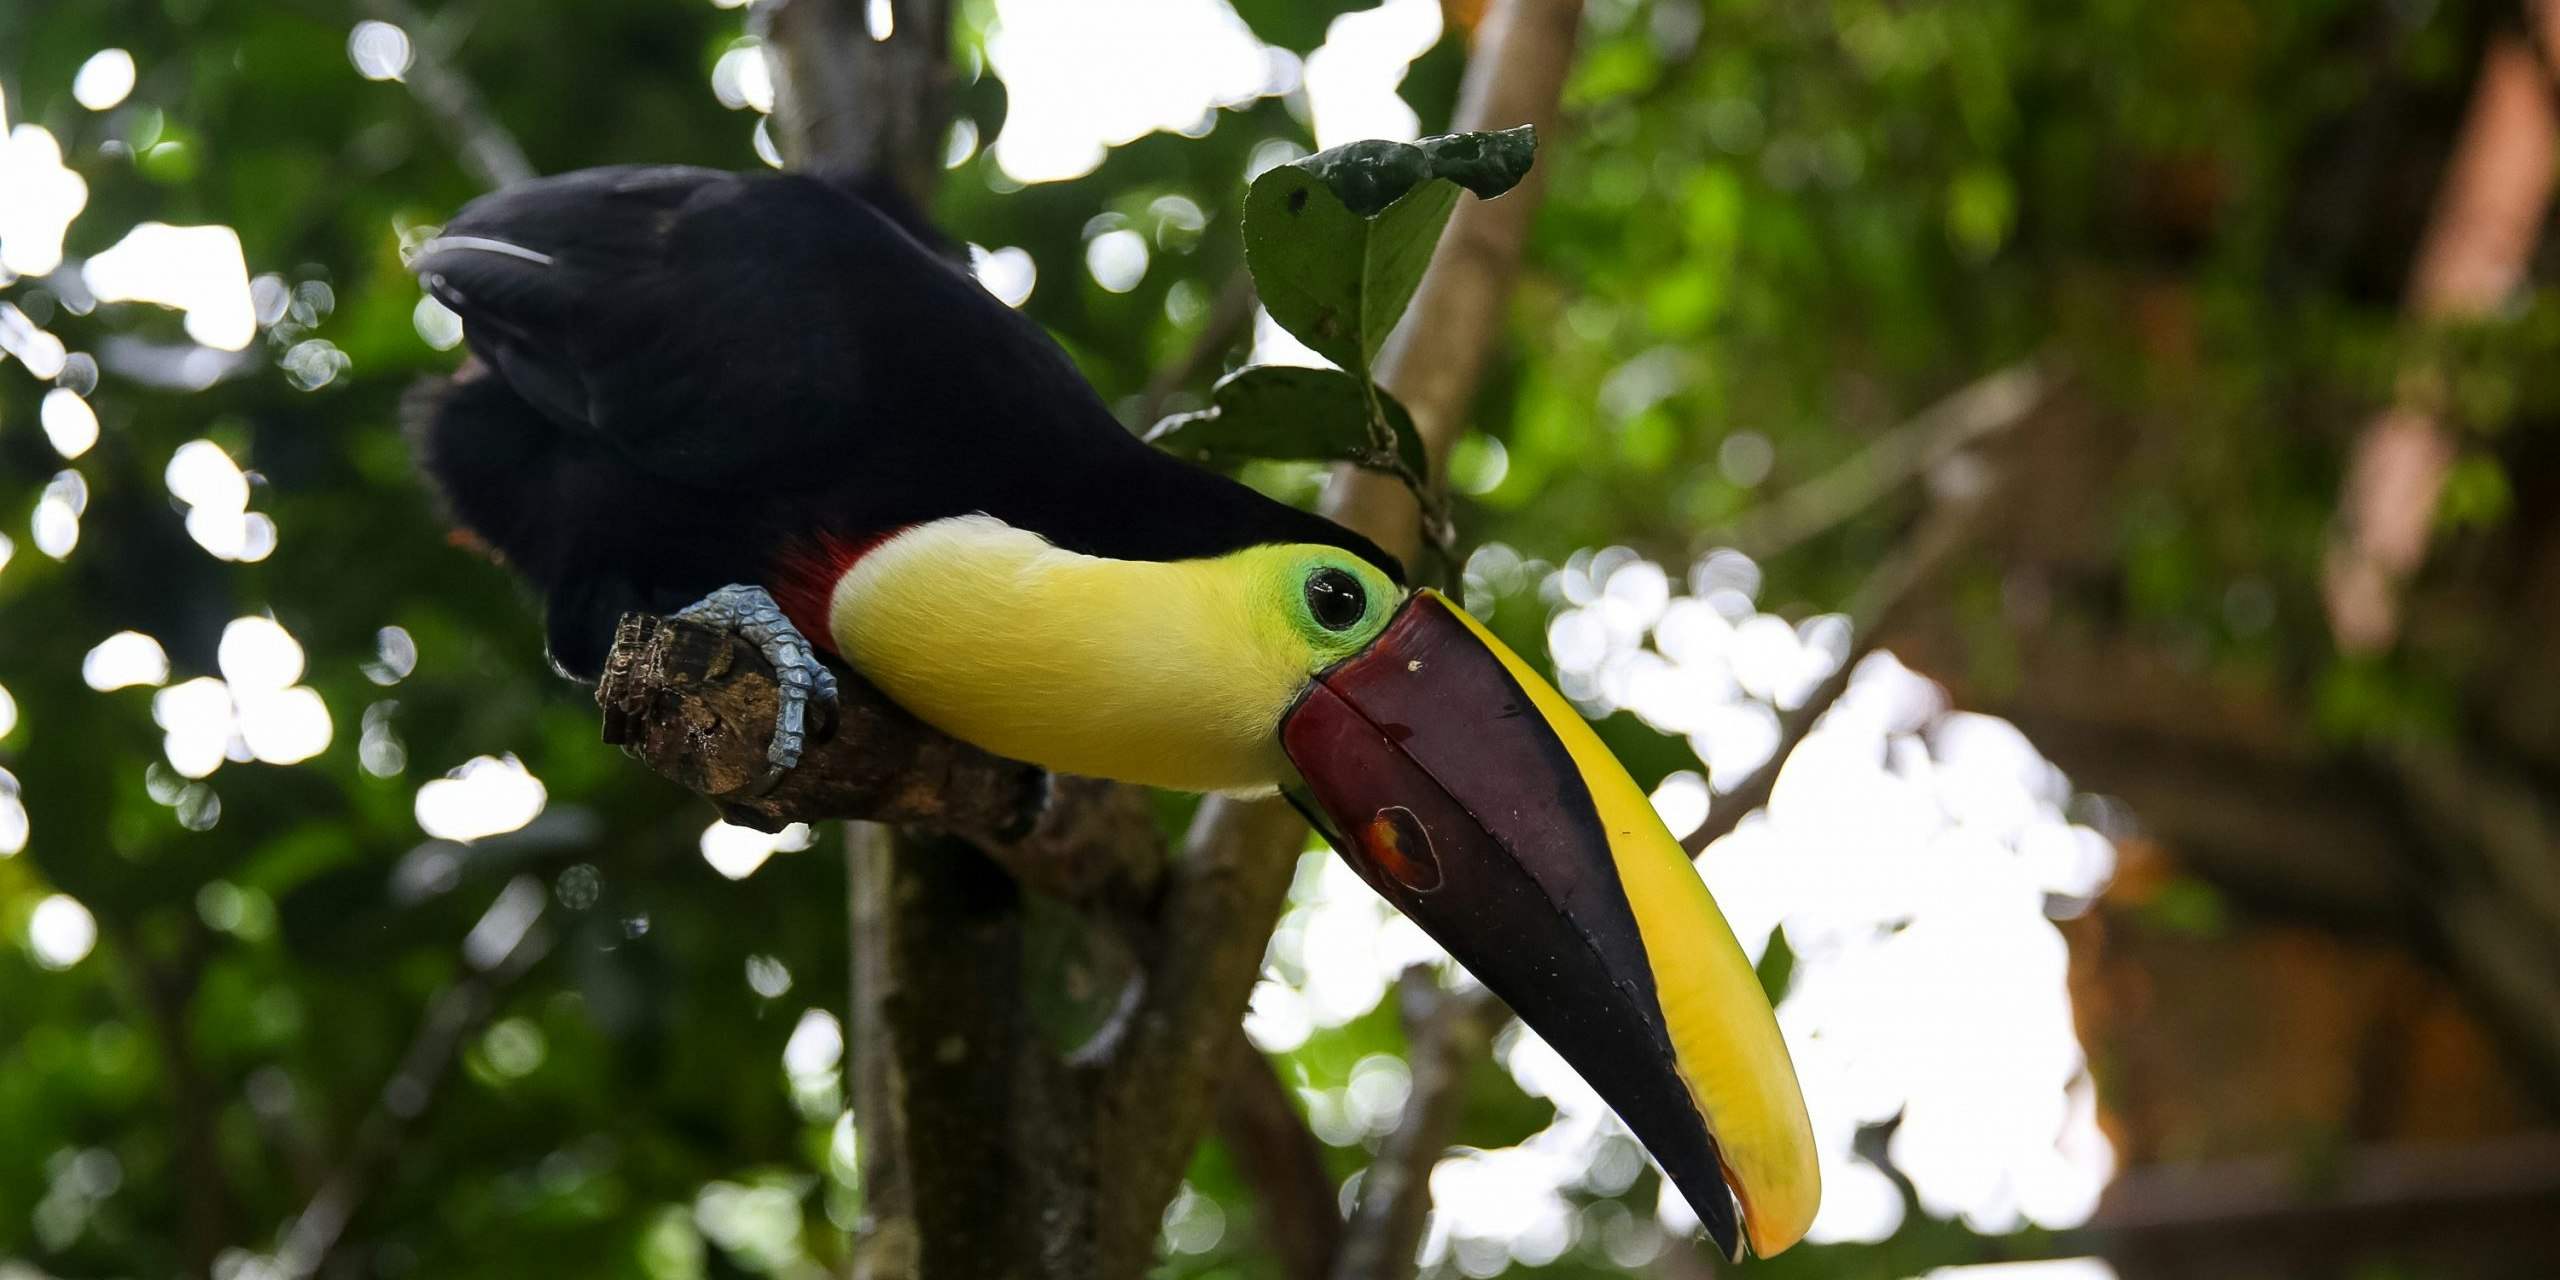 Rustic Adventures: Crazy Fun Facts About Wildlife in the Rainforest